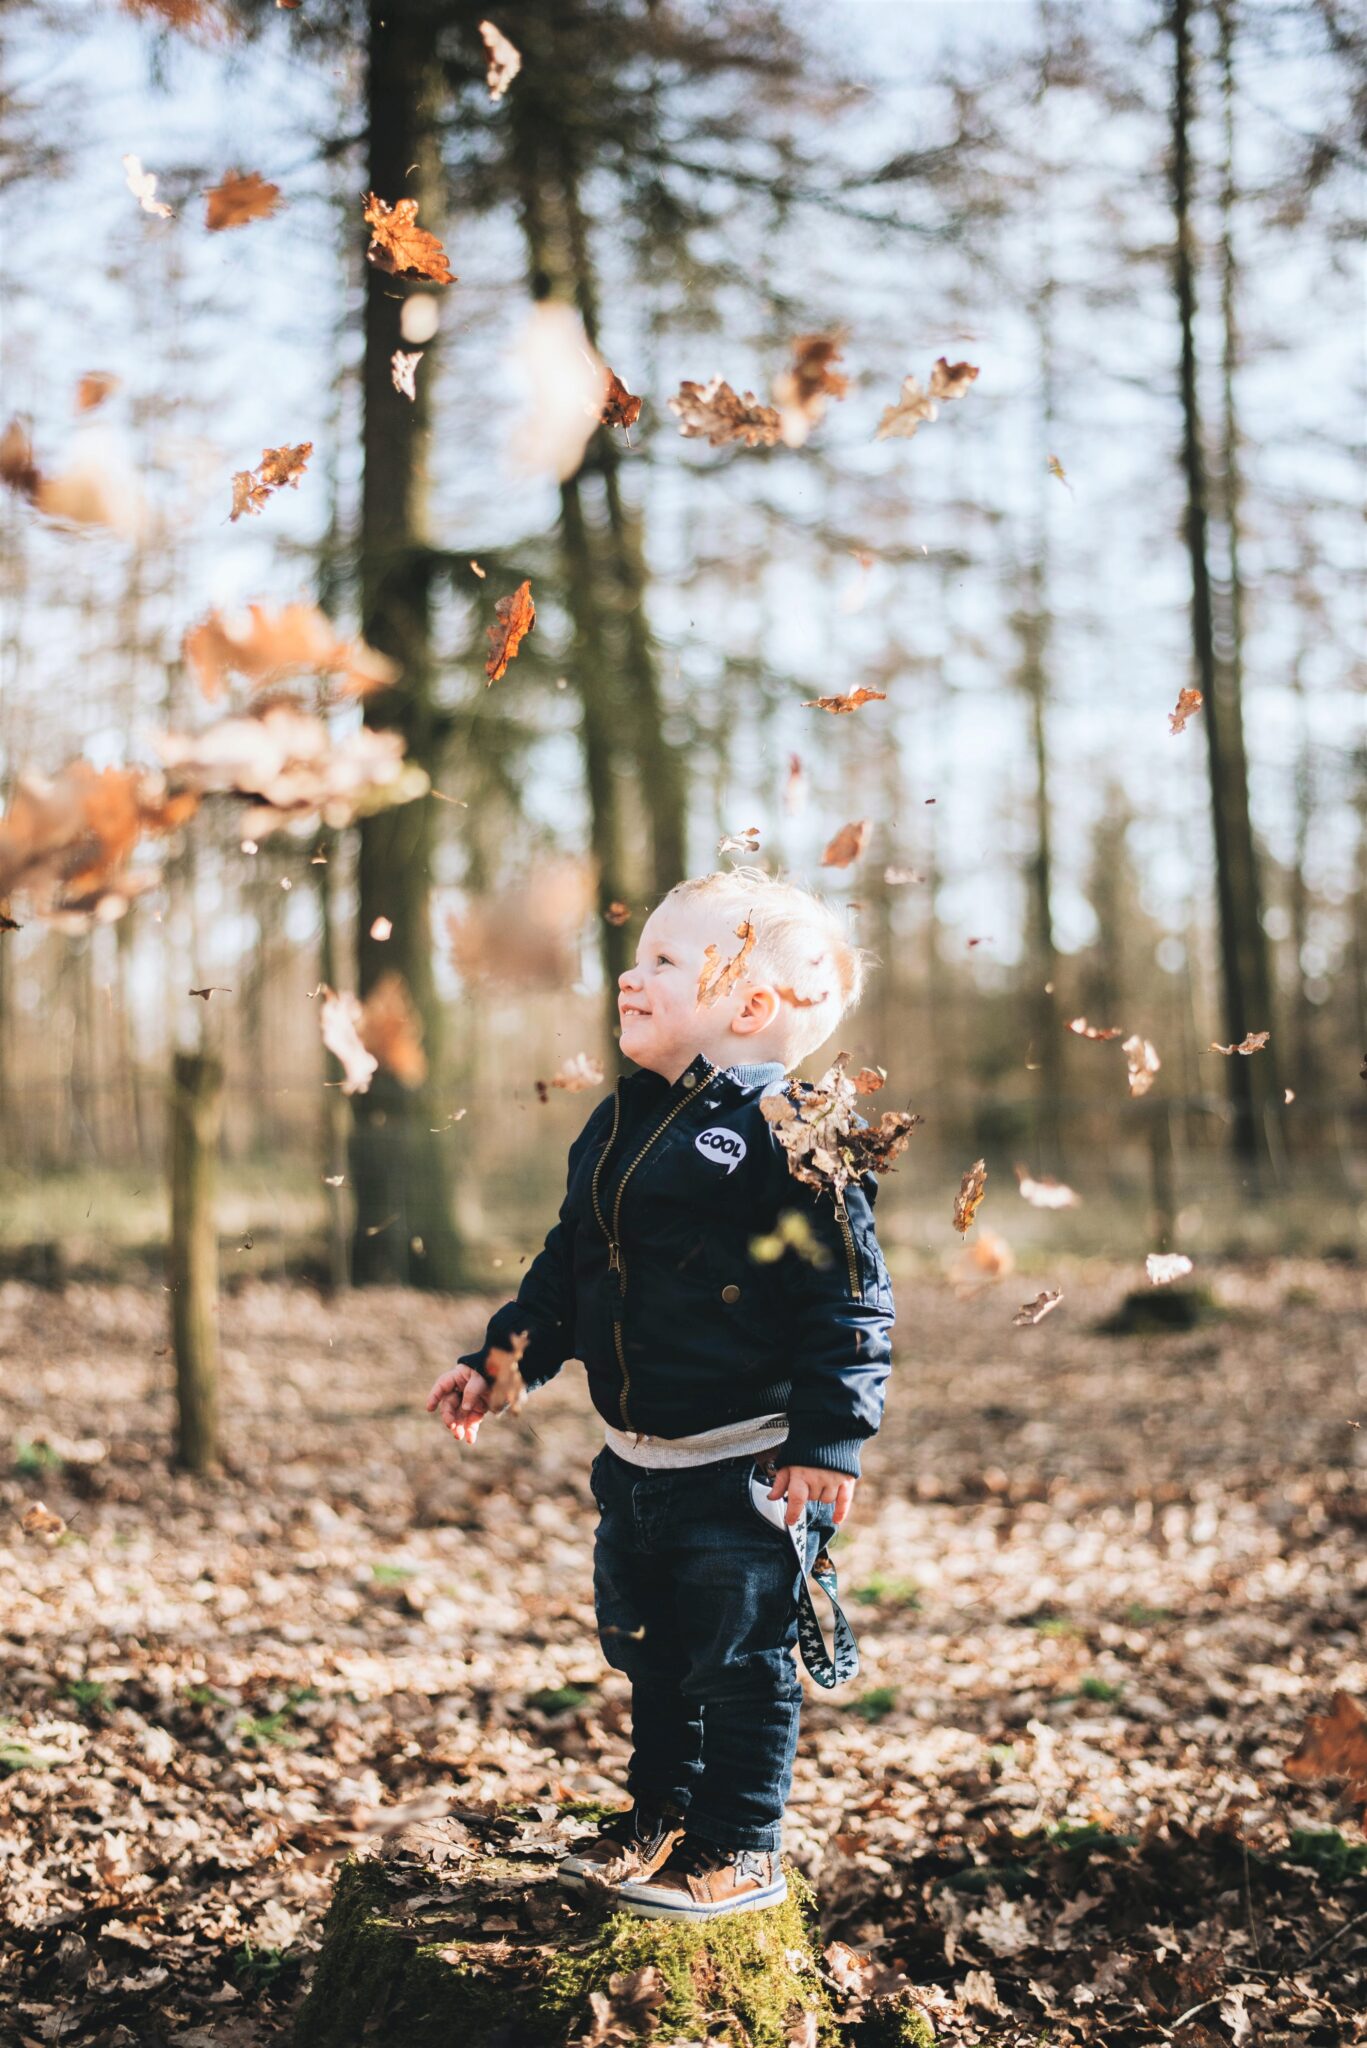 A little boy jumps and plays in fall leaves. This article covers fun outdoor play ideas that nurture imagination and creativity. 